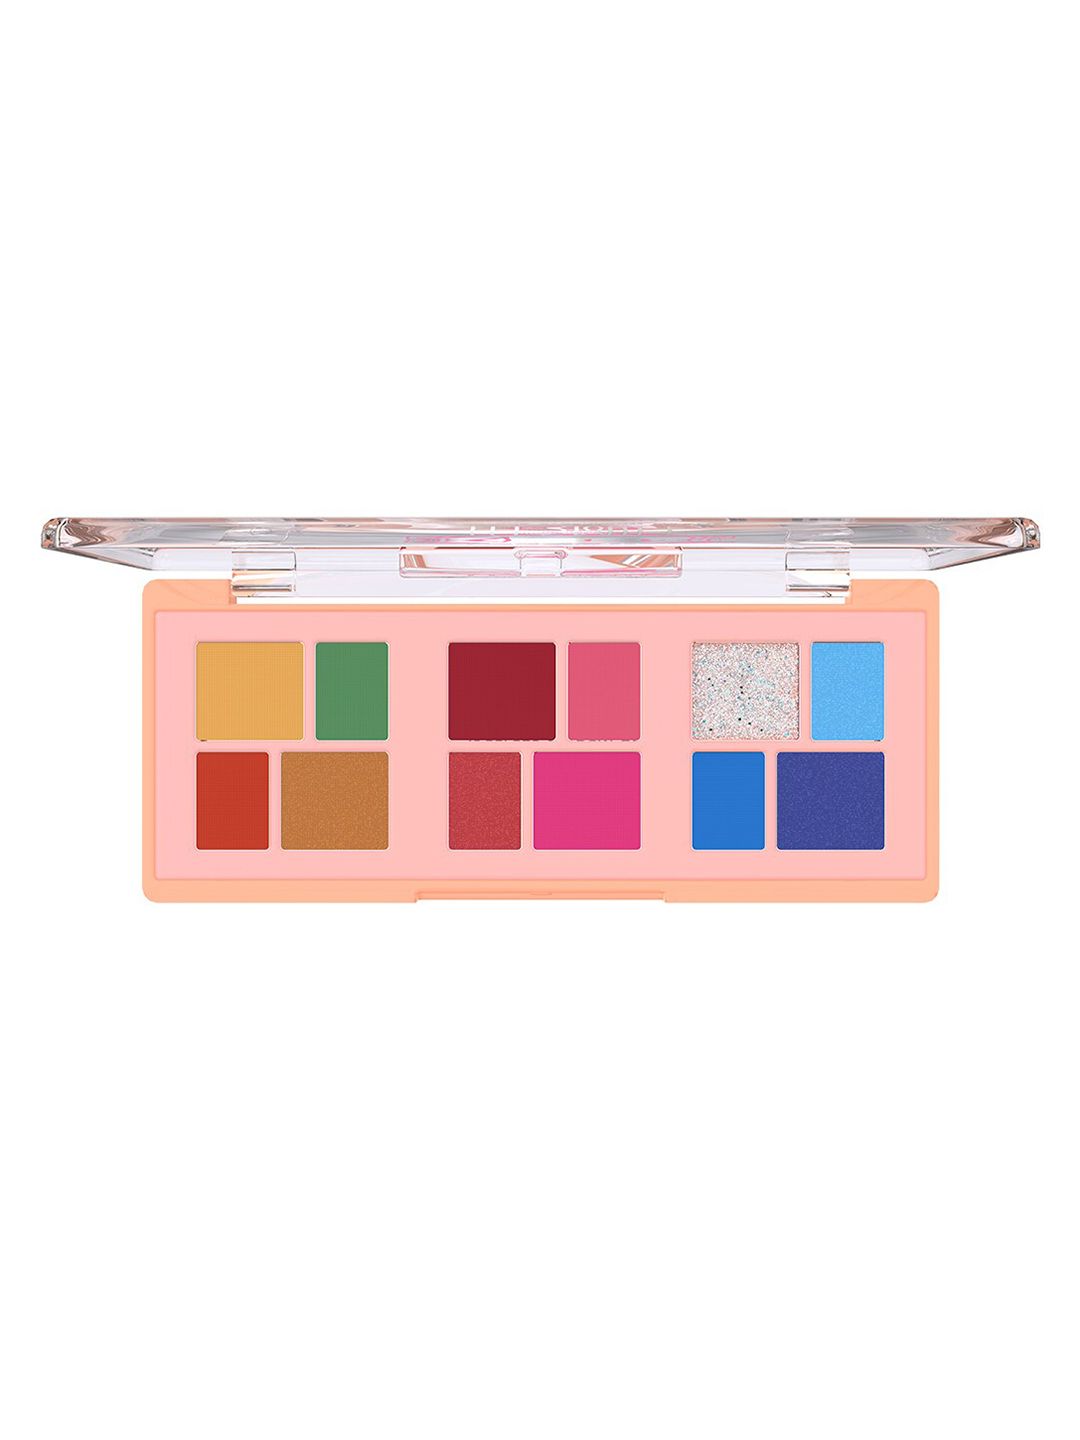 SHRYOAN 12 Colour Eyeshadow Palette-18 gm Price in India